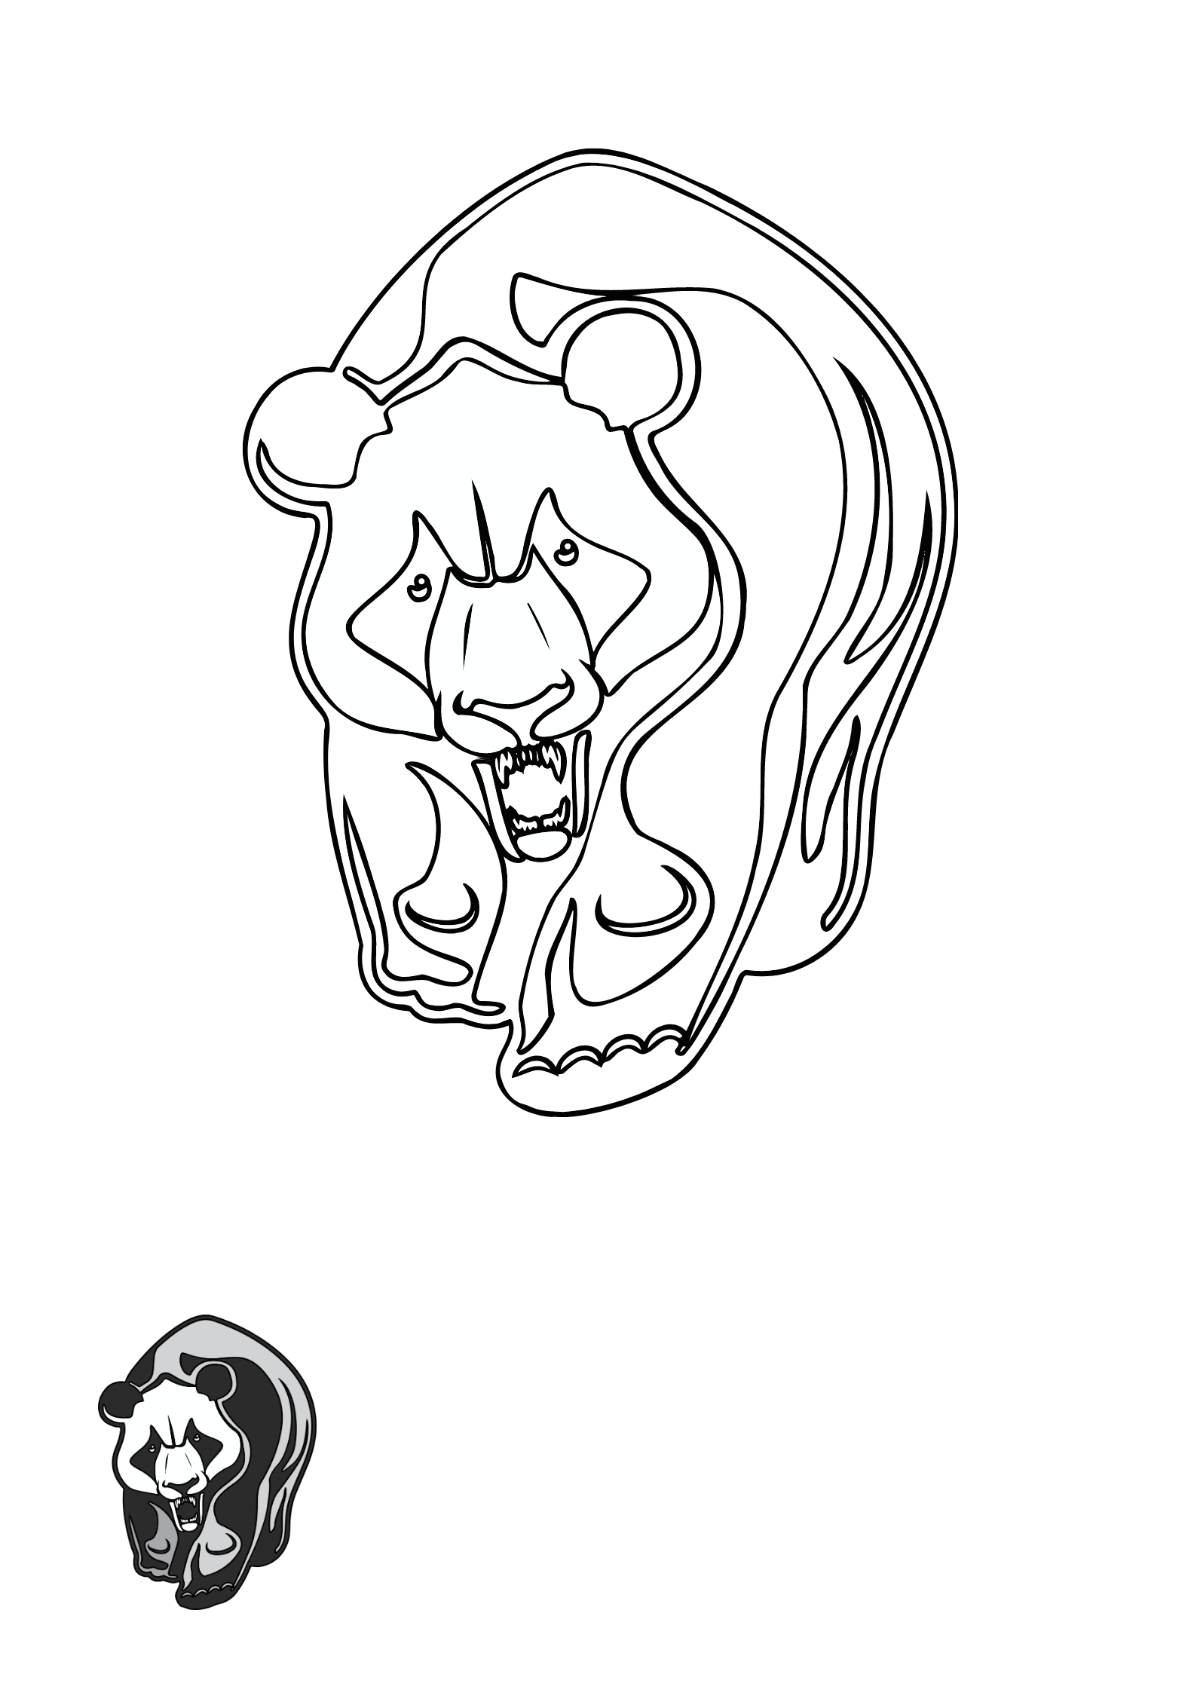 Angry Panda Coloring Page Template